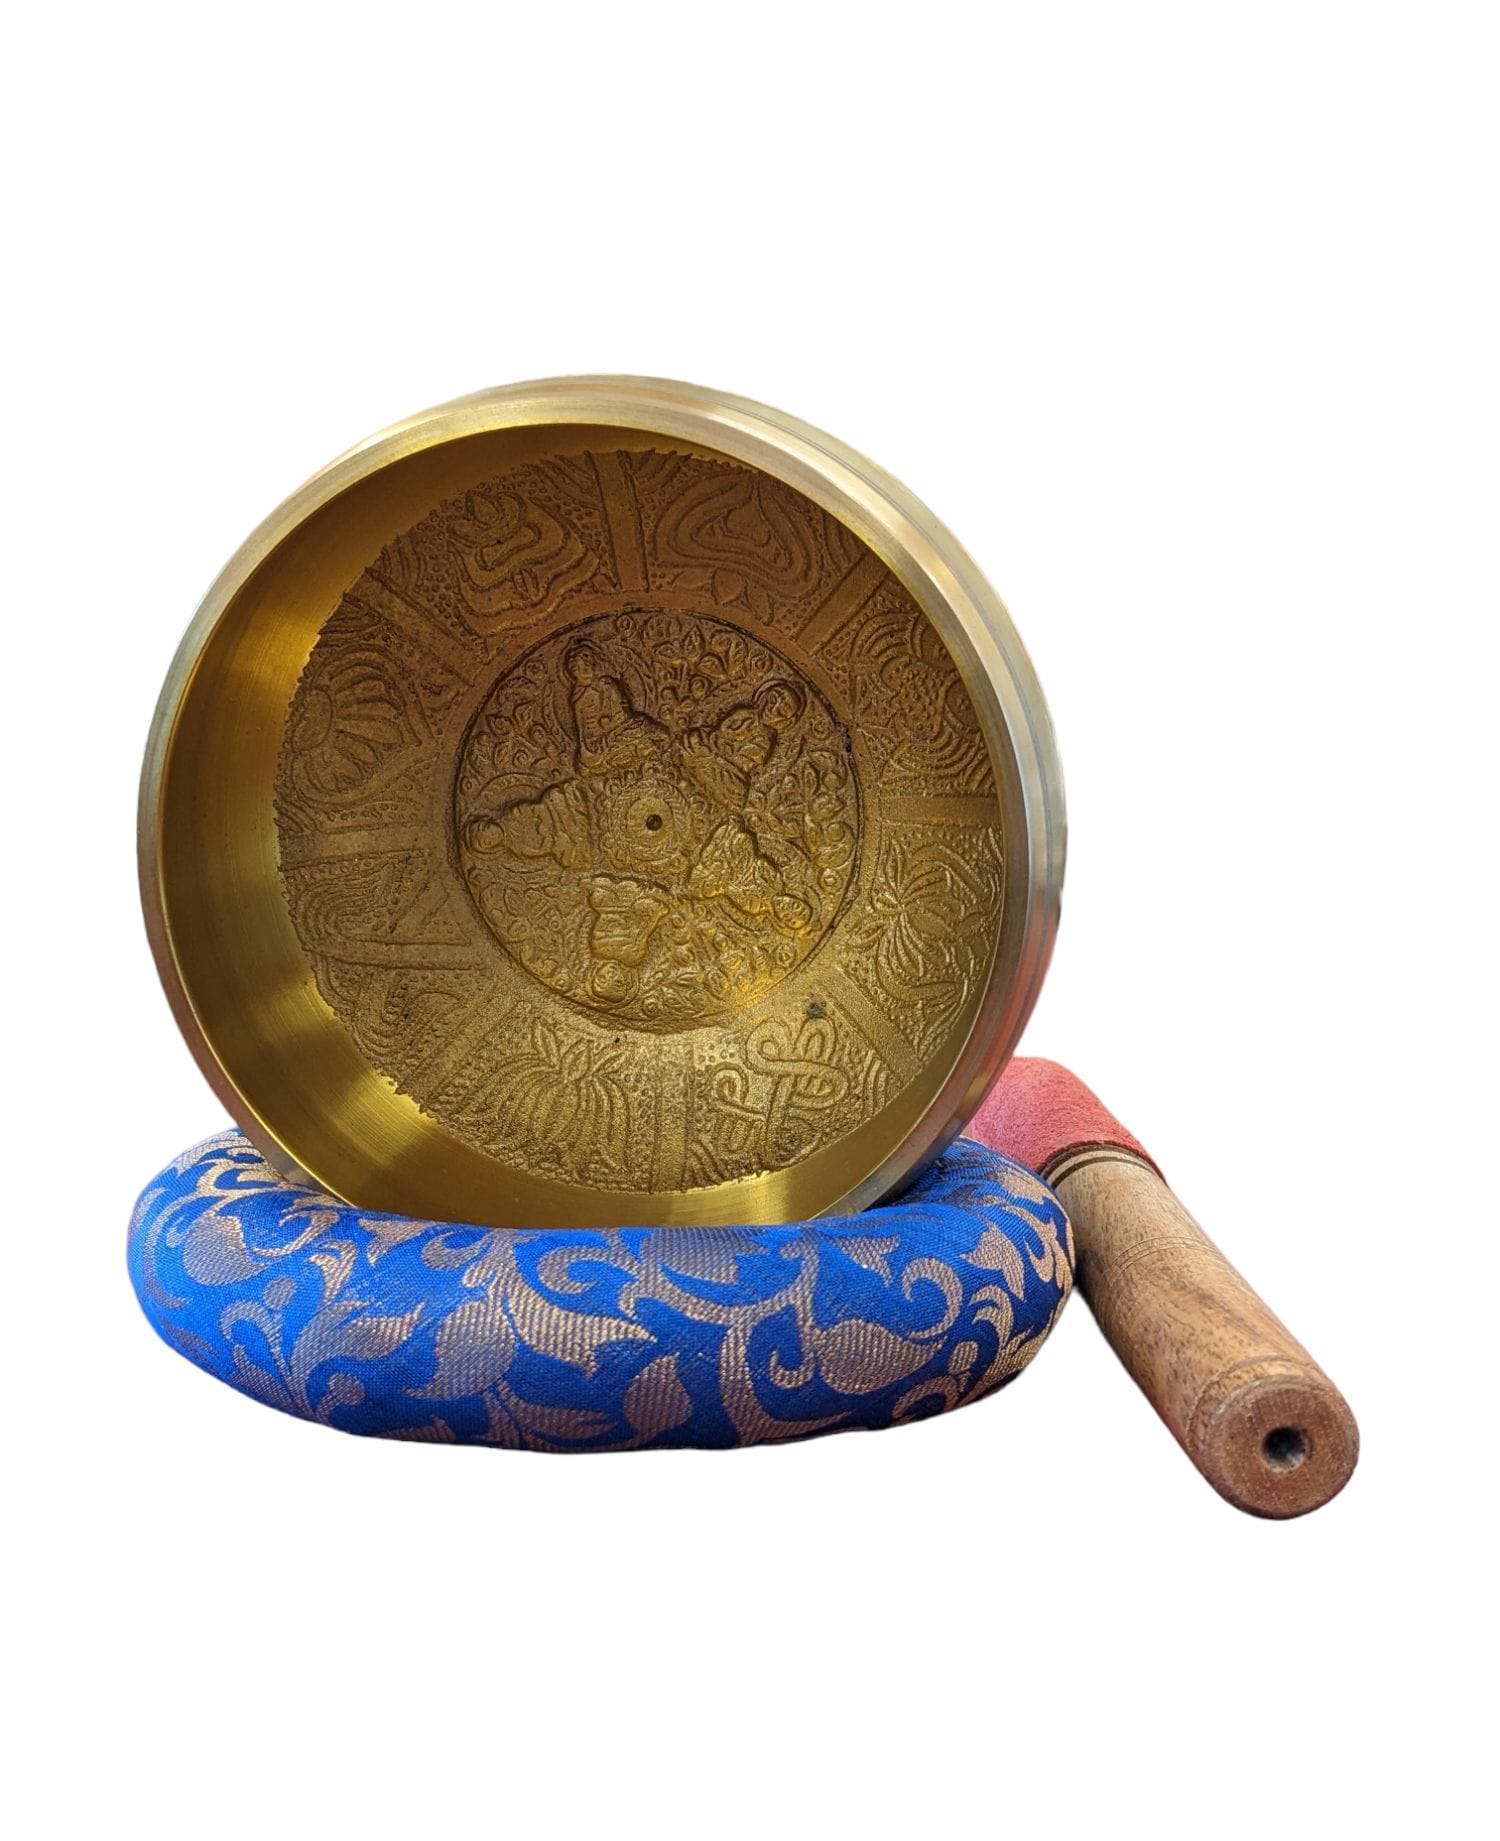 Image of a 6 inch Tibetan Singing bowl with a wooden mallet placed on a Cushion Cover